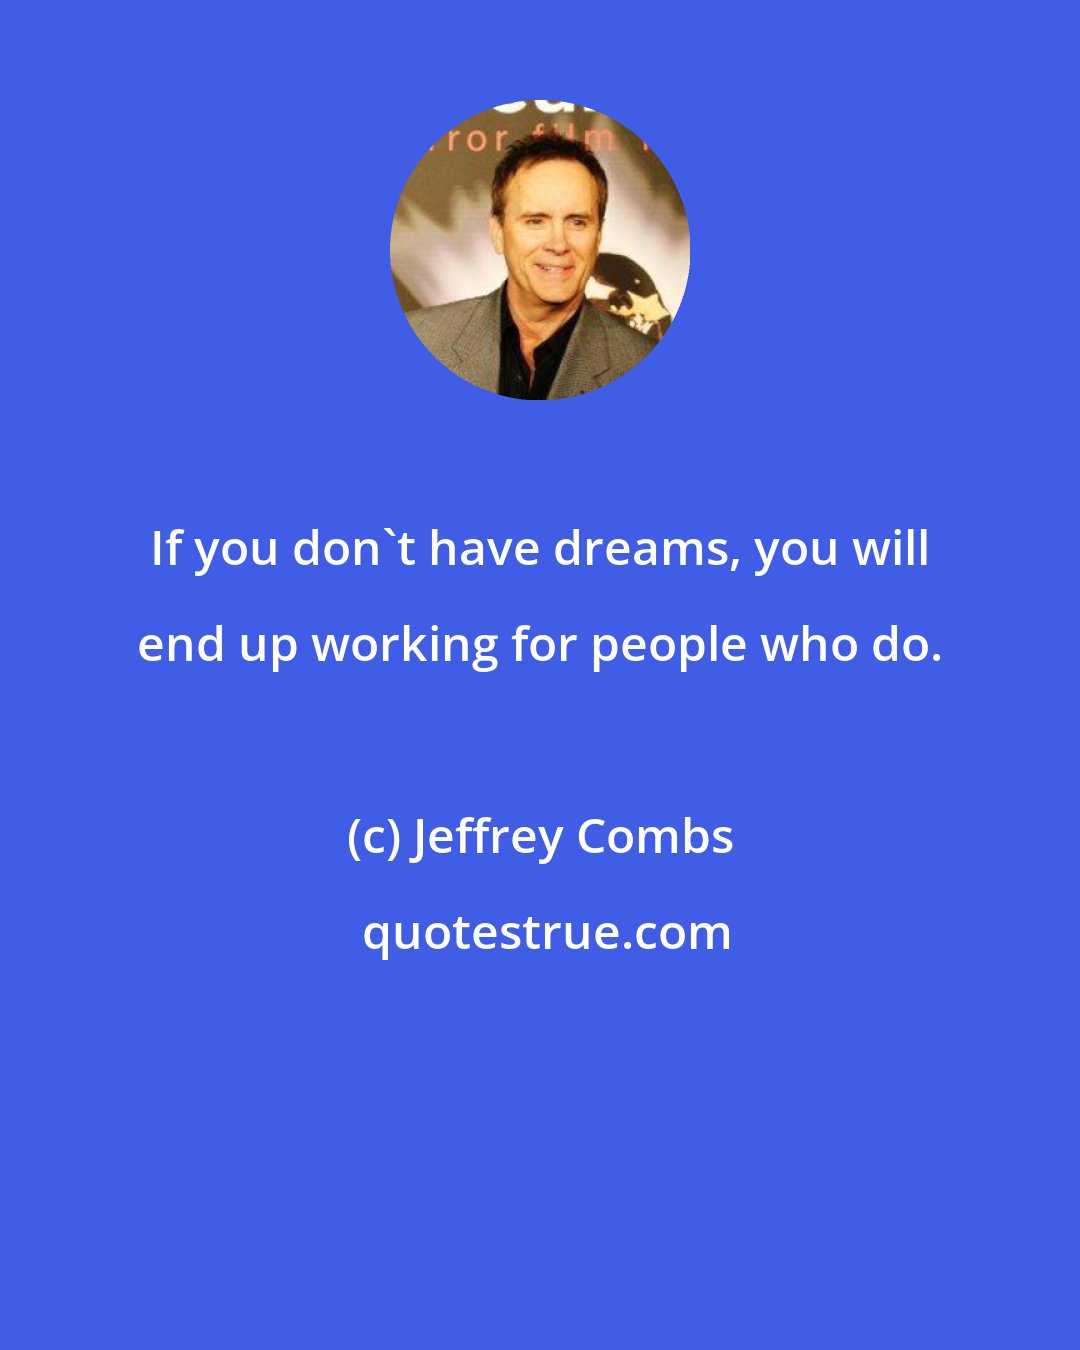 Jeffrey Combs: If you don't have dreams, you will end up working for people who do.